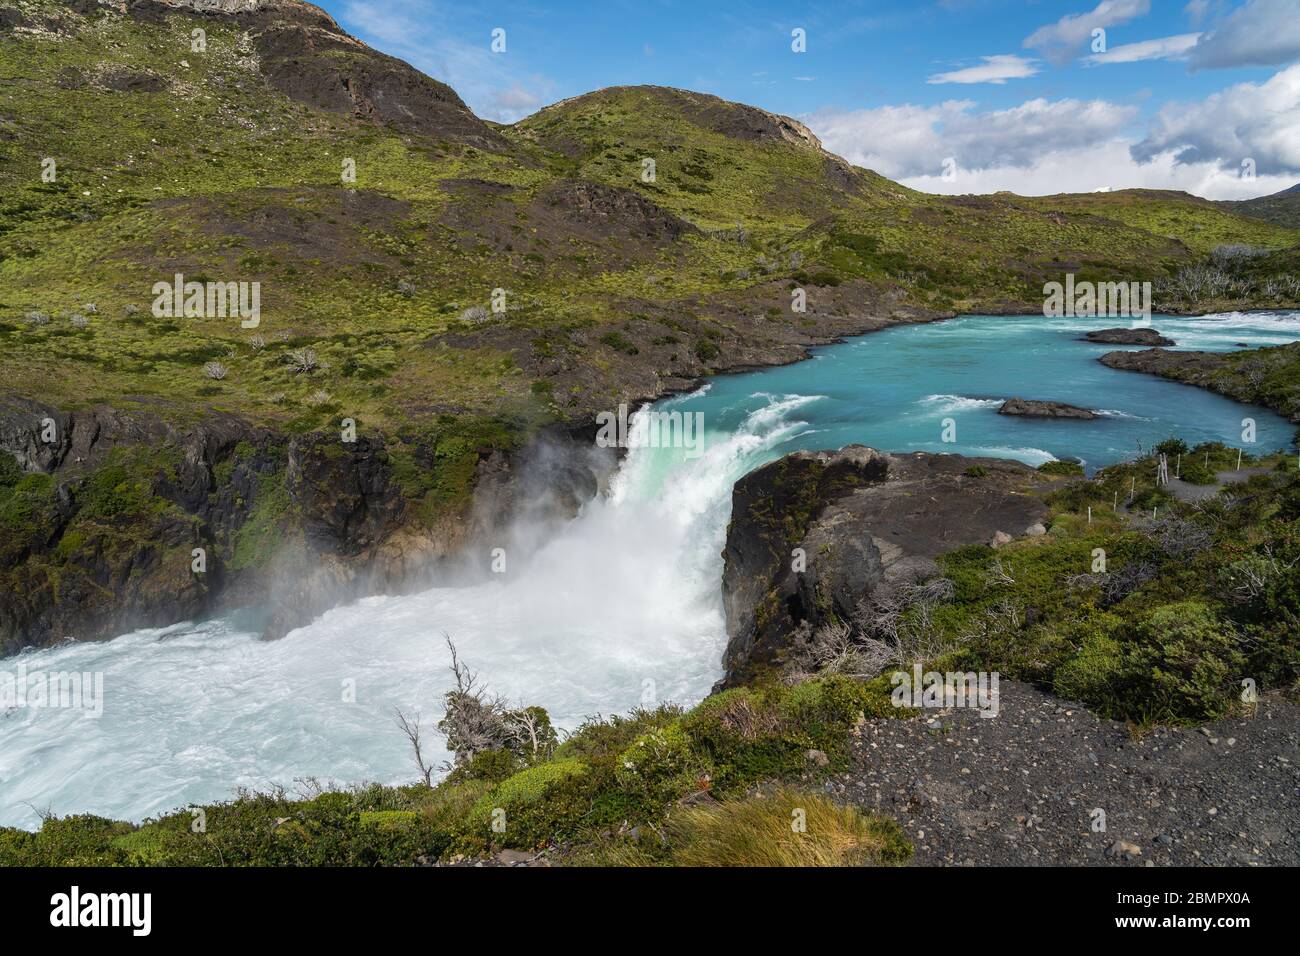 Salto Grande waterfall in Torres Del Paine National Park, Patagonia, Chile, South America. Stock Photo